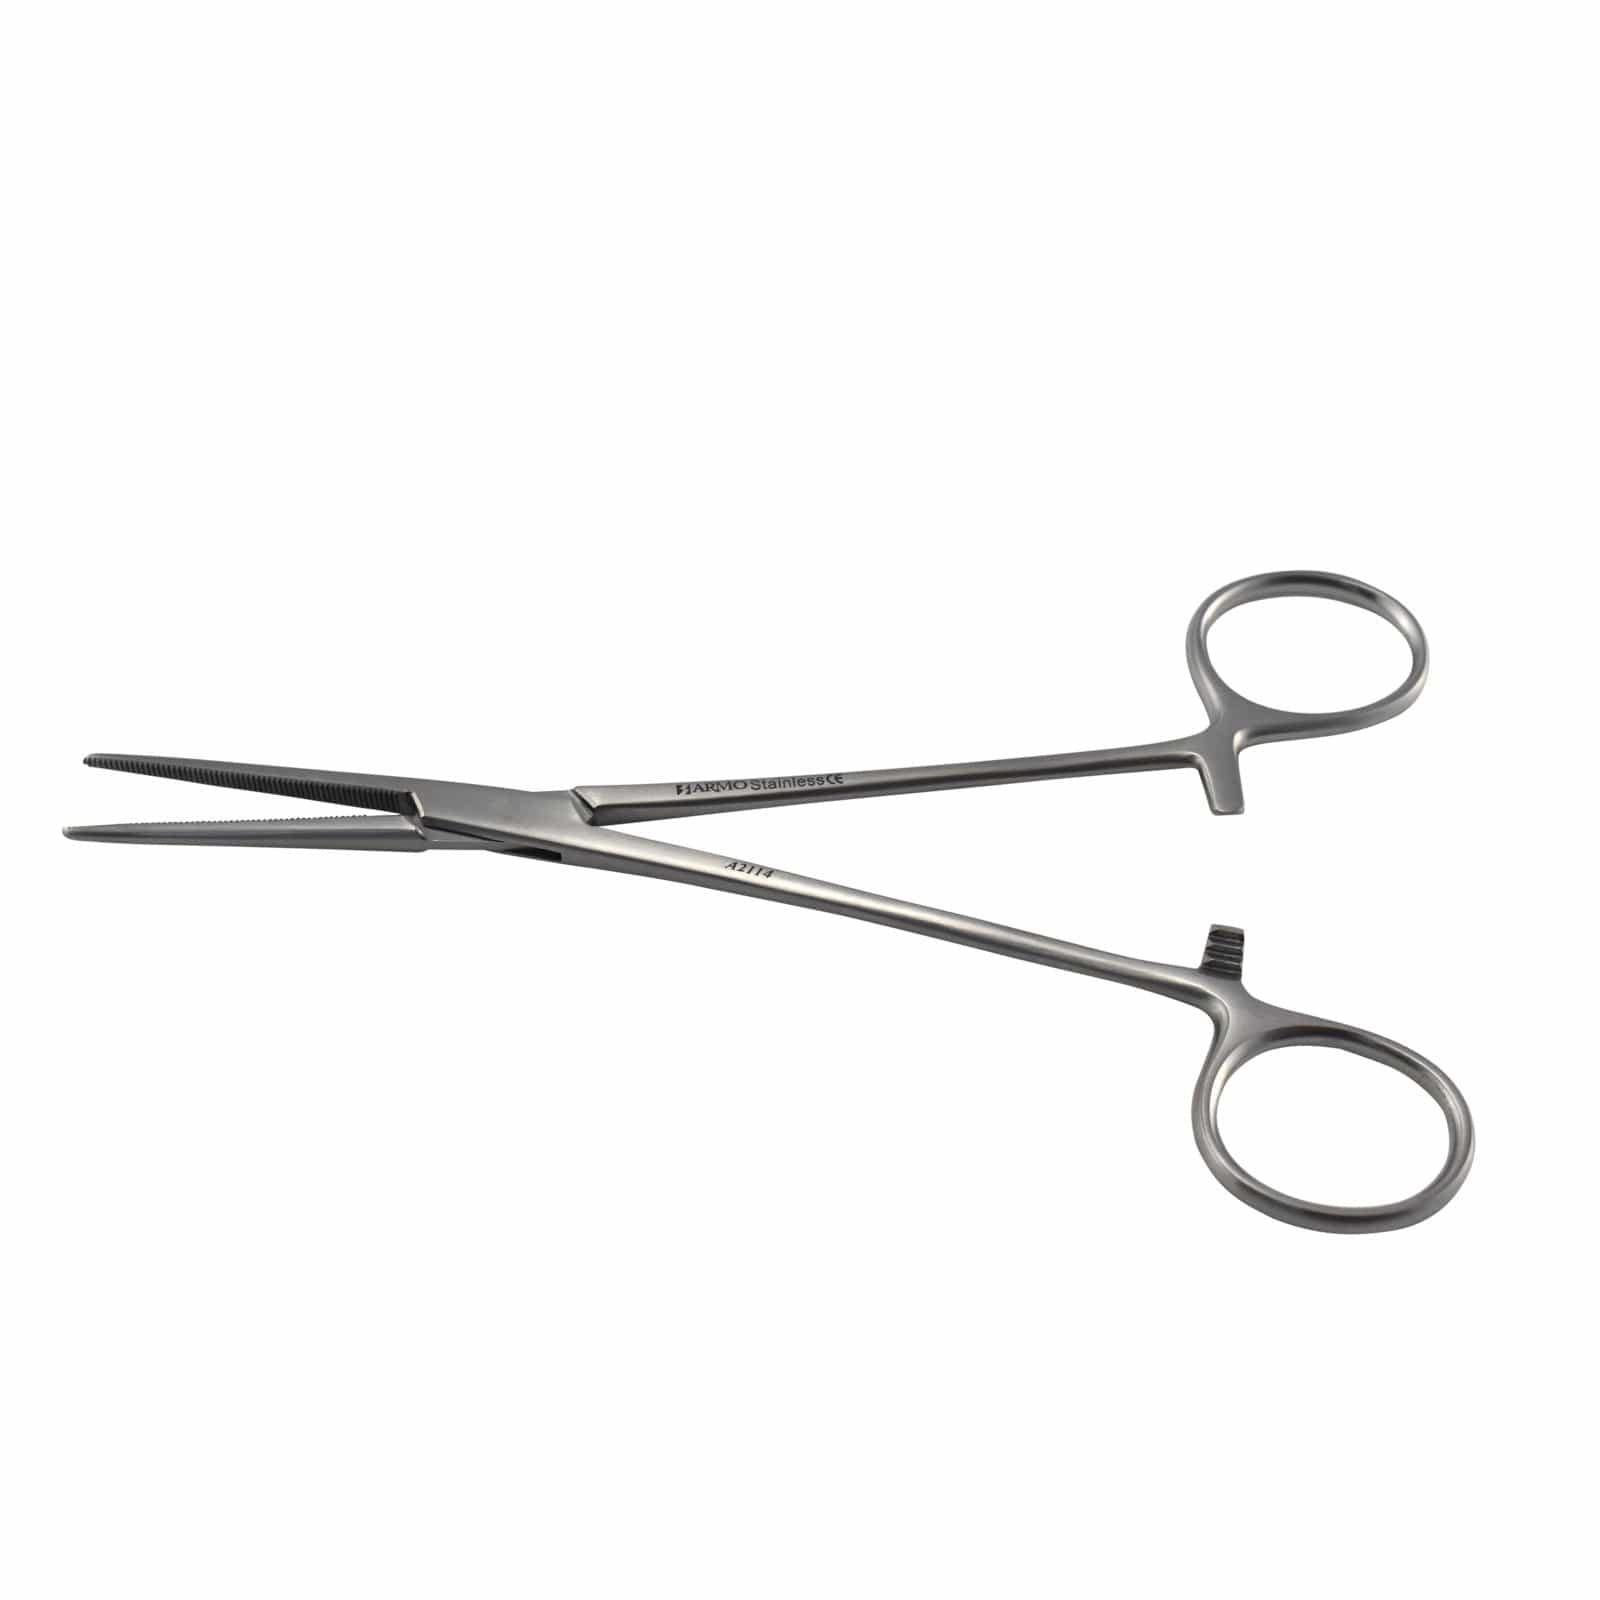 Armo Surgical Instruments 18cm / Straight Armo Crile Artery Forceps